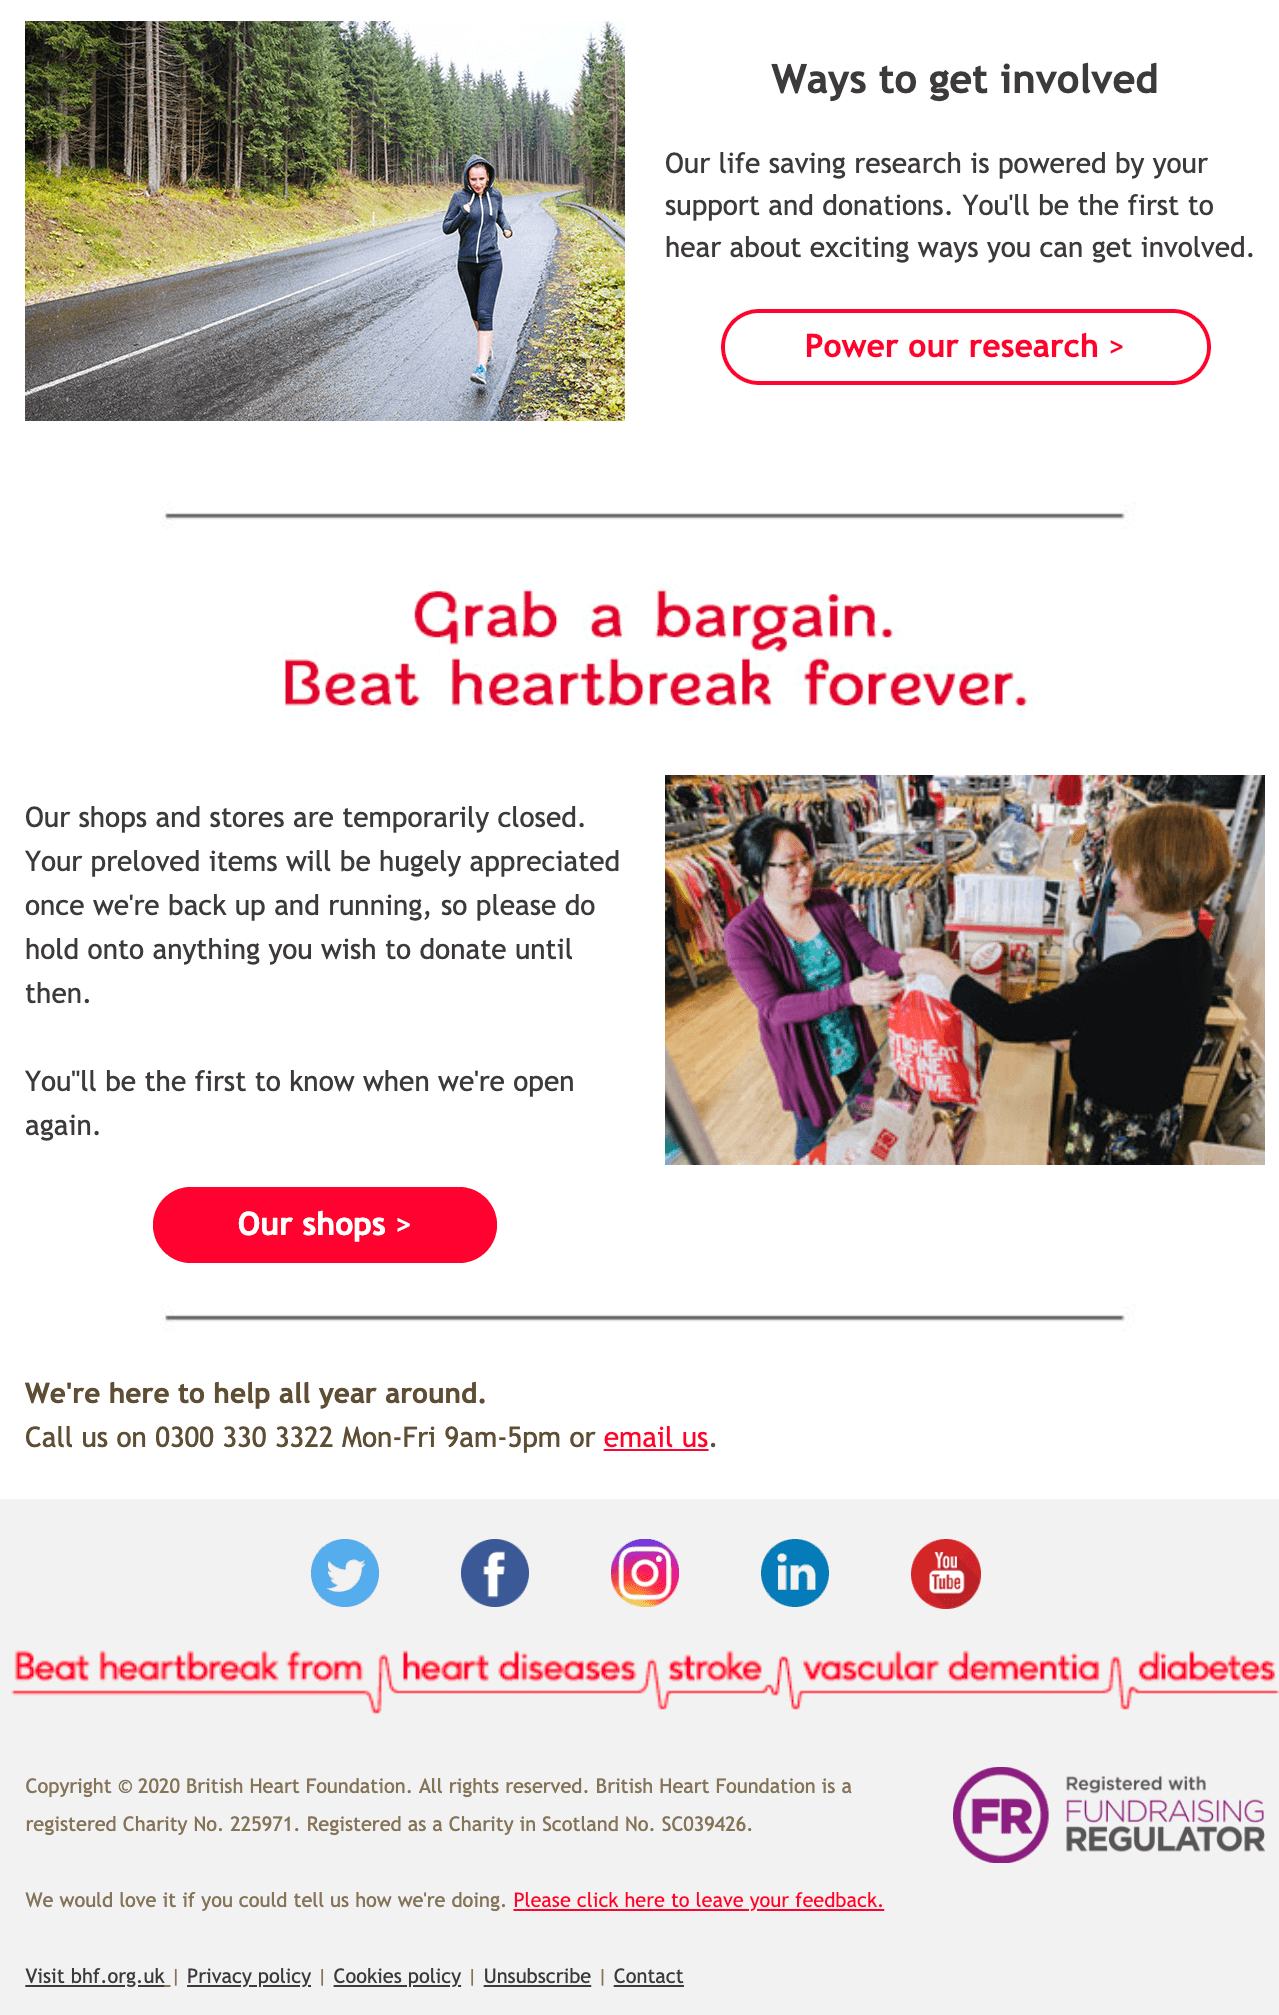 Image of the second half of the BHF's welcome email. This part provides more information on the organisation's donation stores and provides links to their social media platforms. 